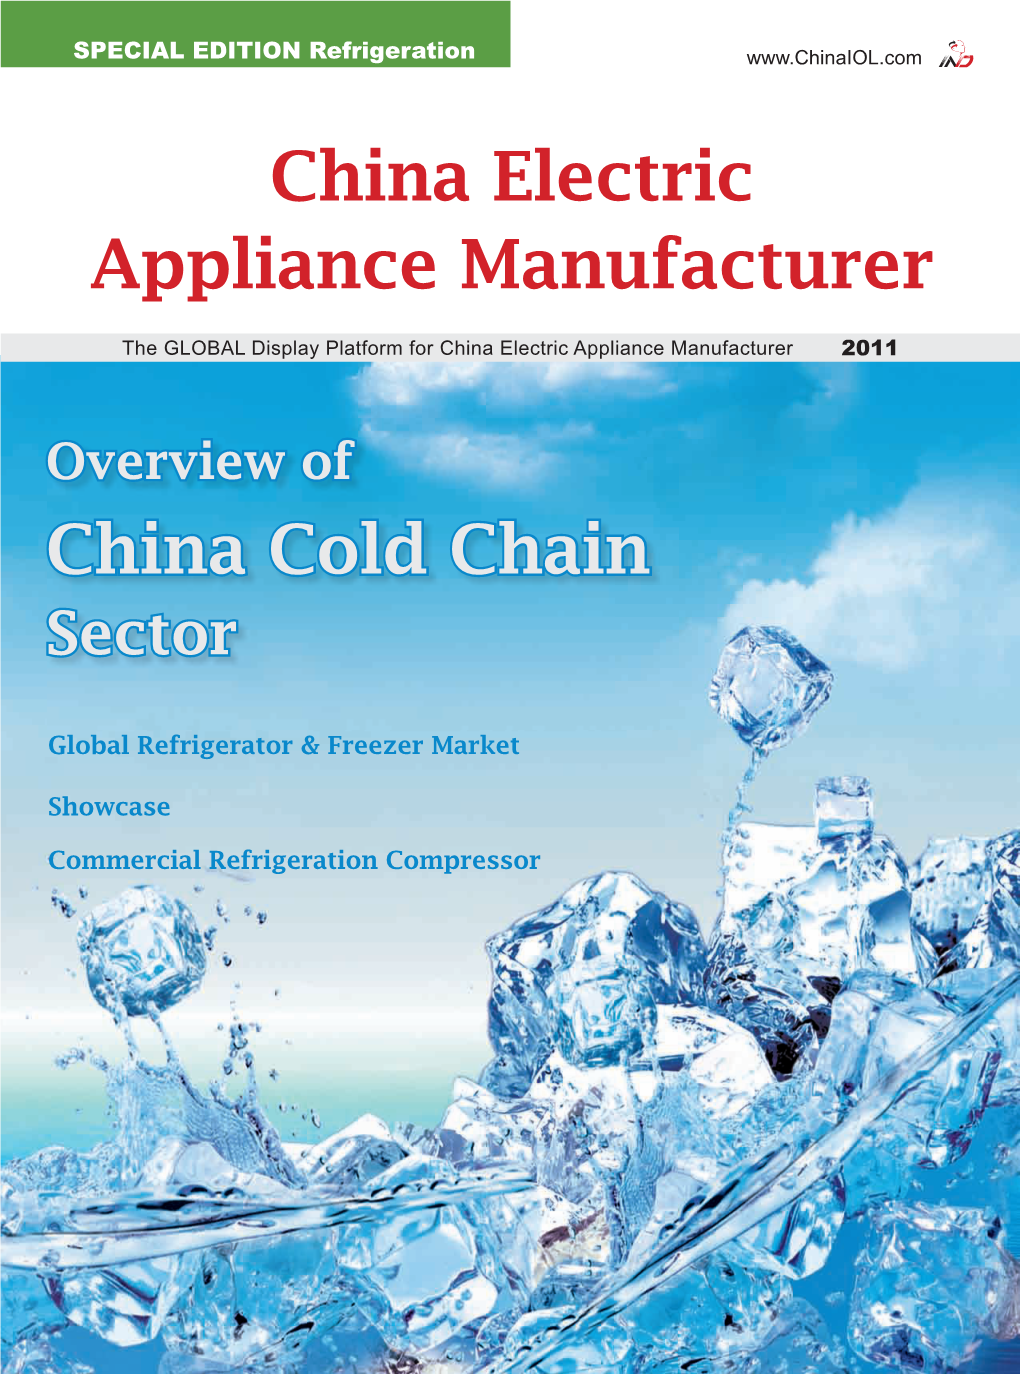 China Electric Appliance Manufacturer China Cold Chain